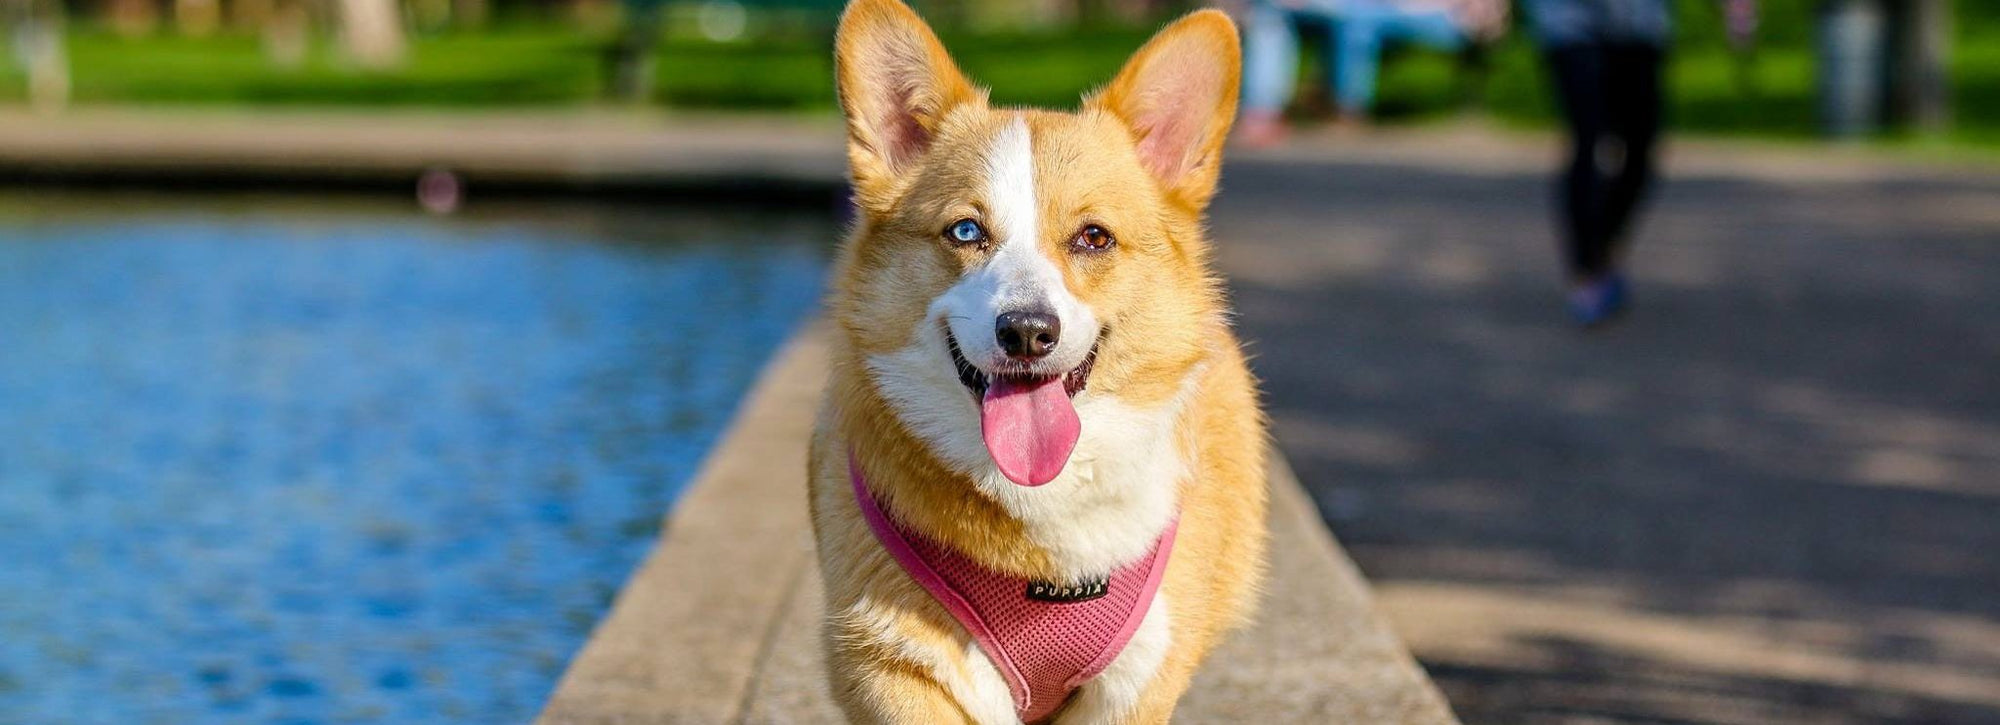 Corgi in a pink harness panting and walking through the park.